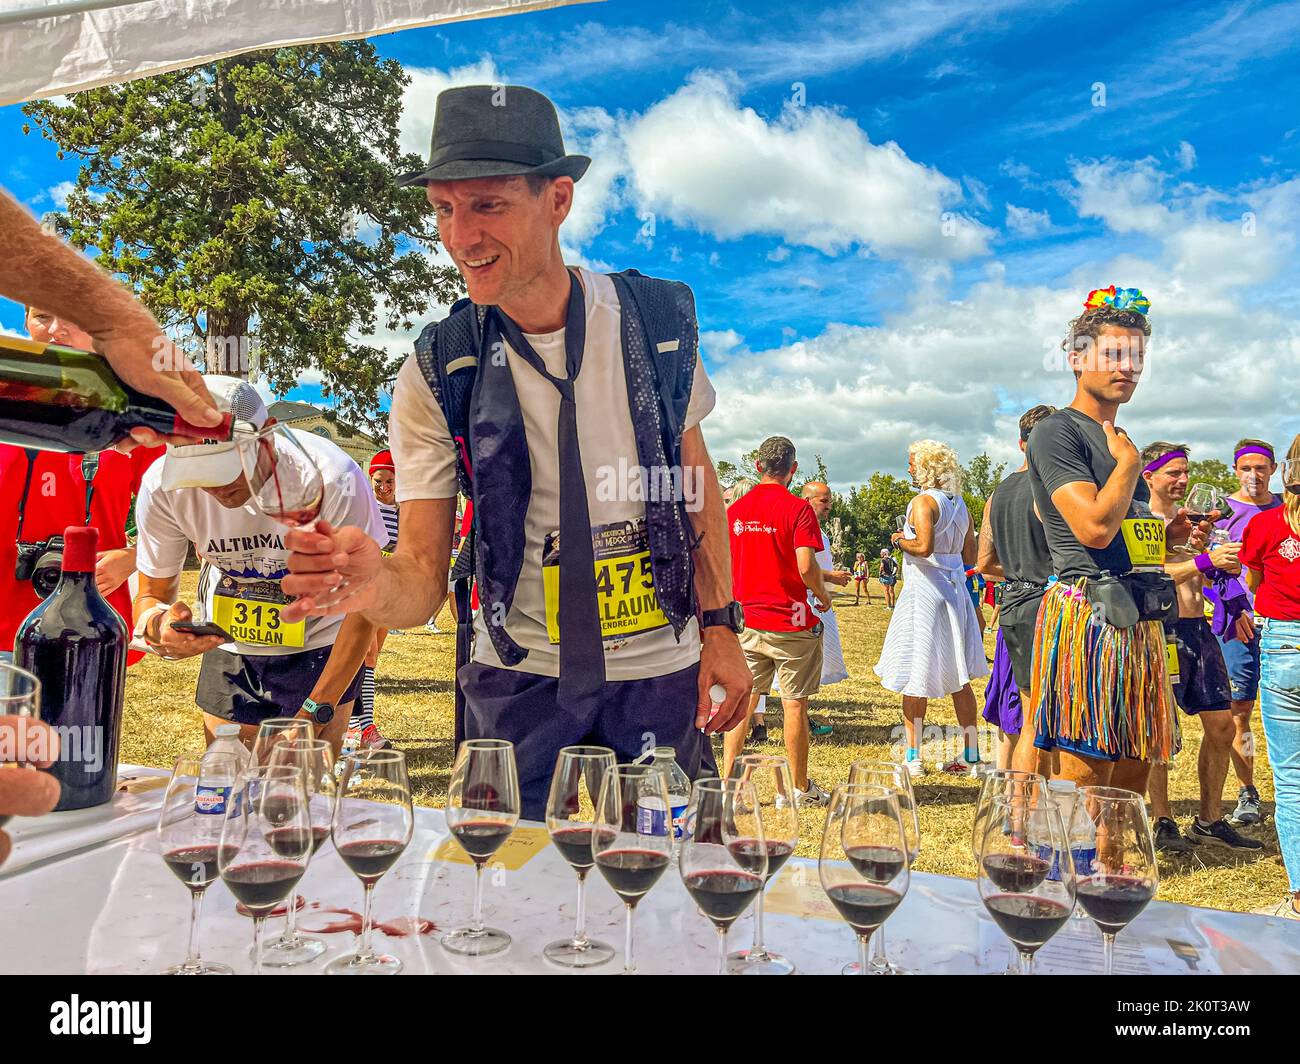 Things are done in style at Chateau Phelan Segur. Here, the participants of the 36th Marathon des Chateaux du Medoc are served red wine in glasses. Many runners can see the glory of the moment Stock Photo